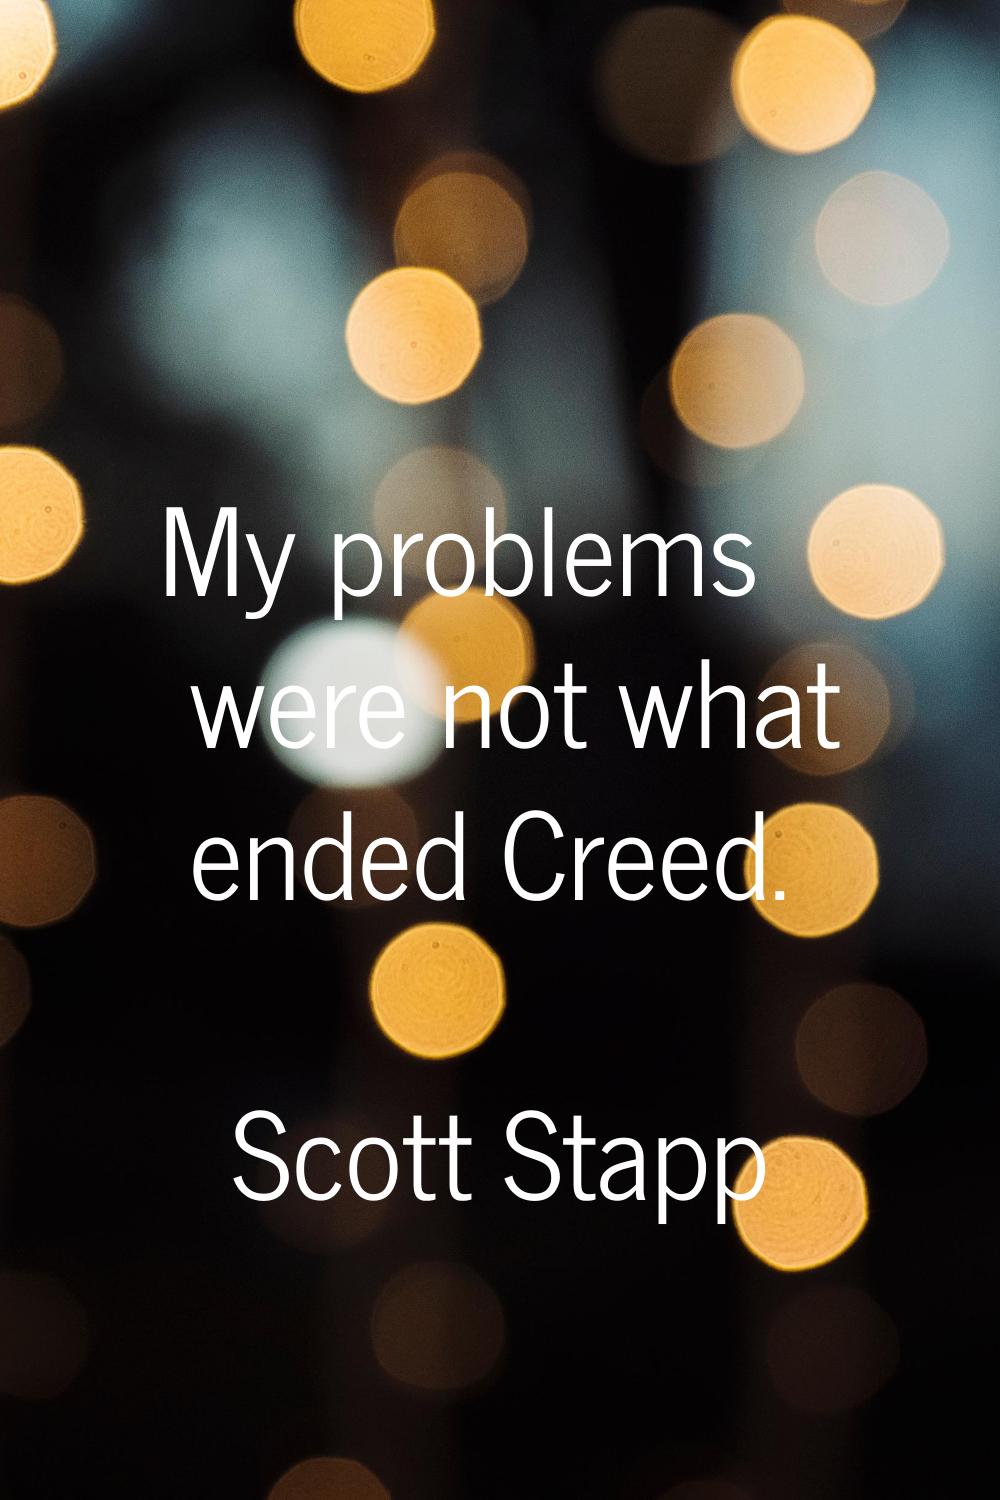 My problems were not what ended Creed.